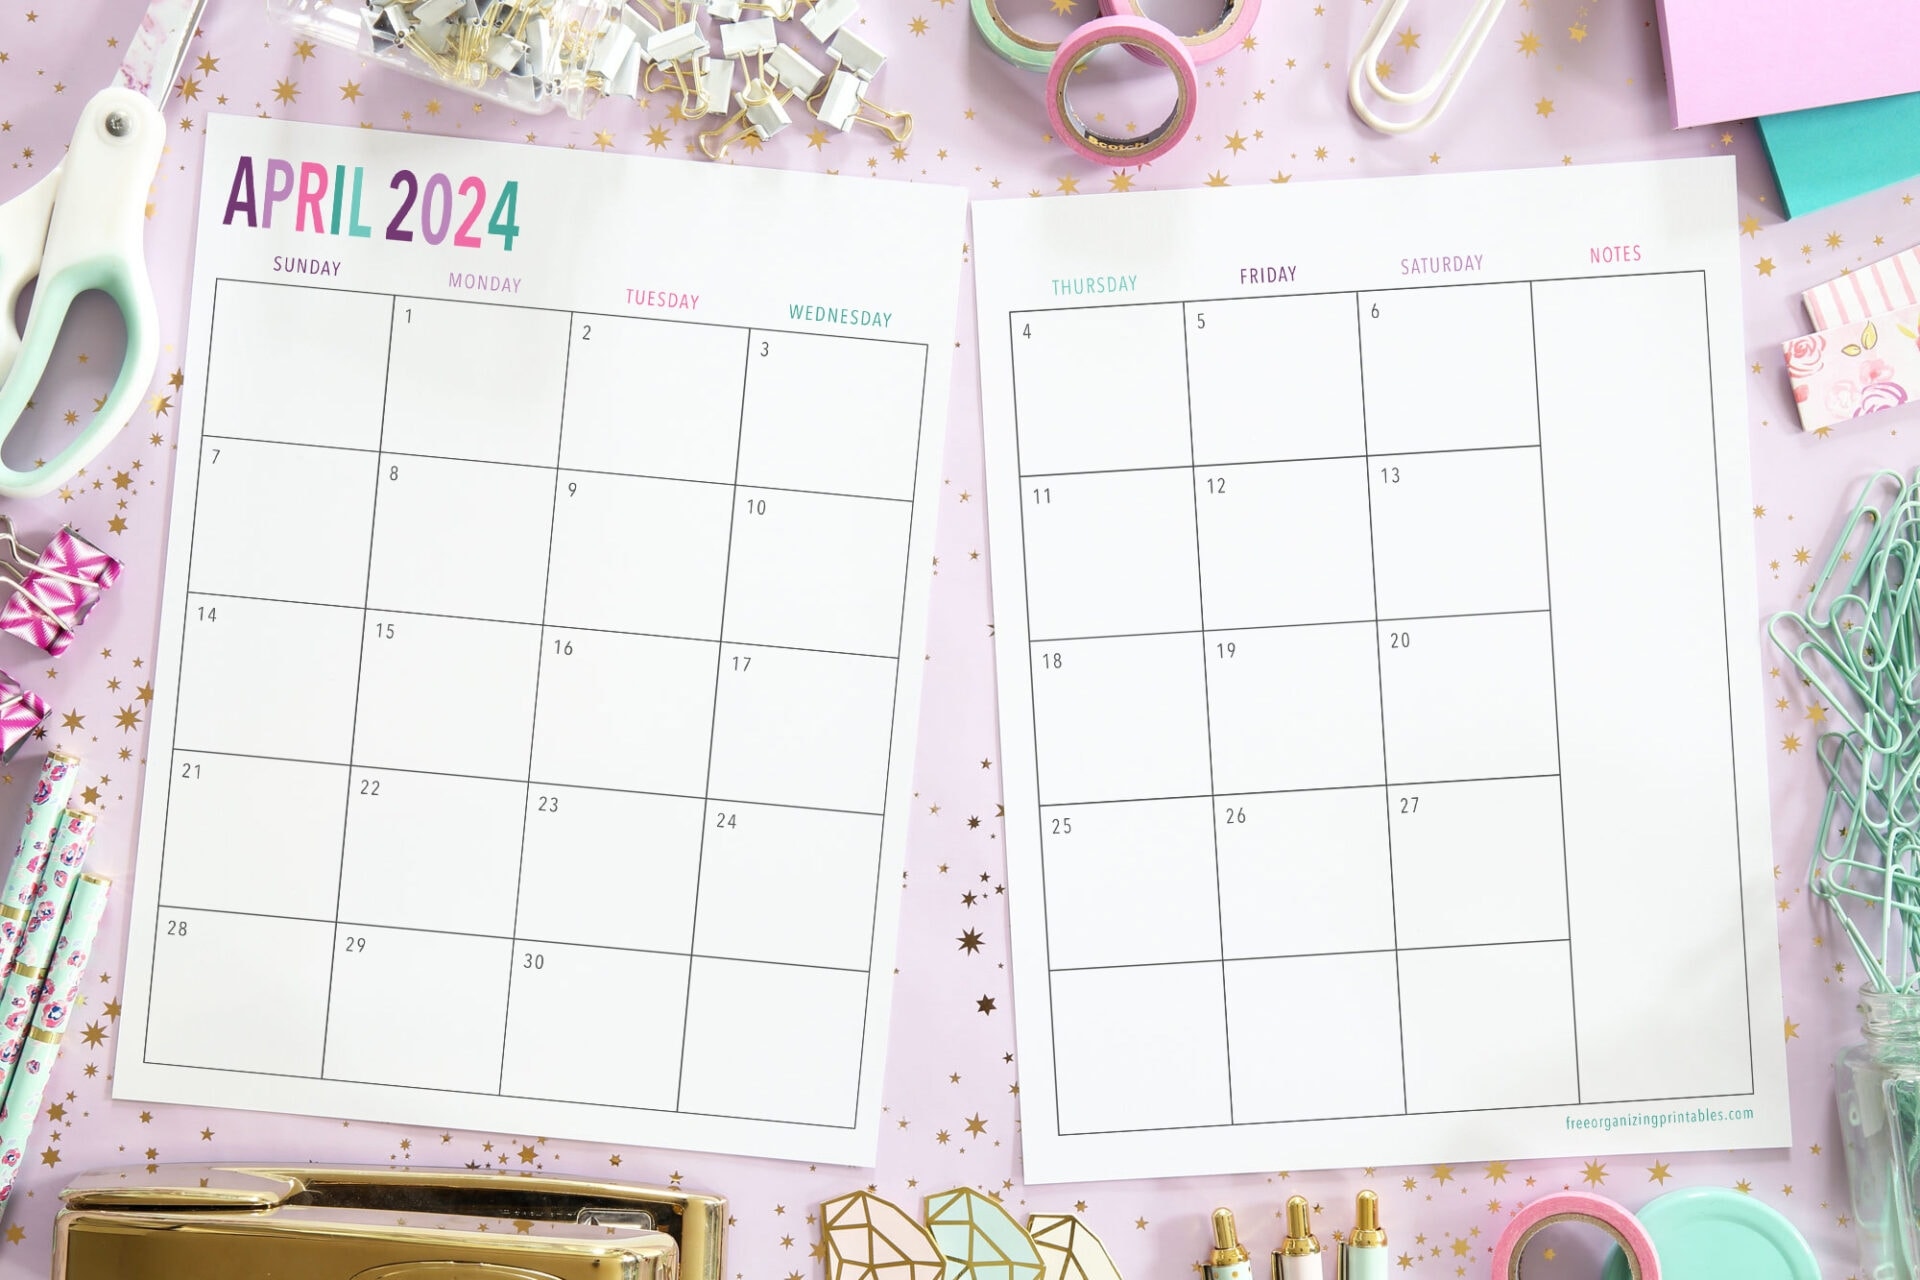 Free Printable 2 Page Blank Monthly Calendar 2024 for Free Printable Bi-Monthly Calendar 2024